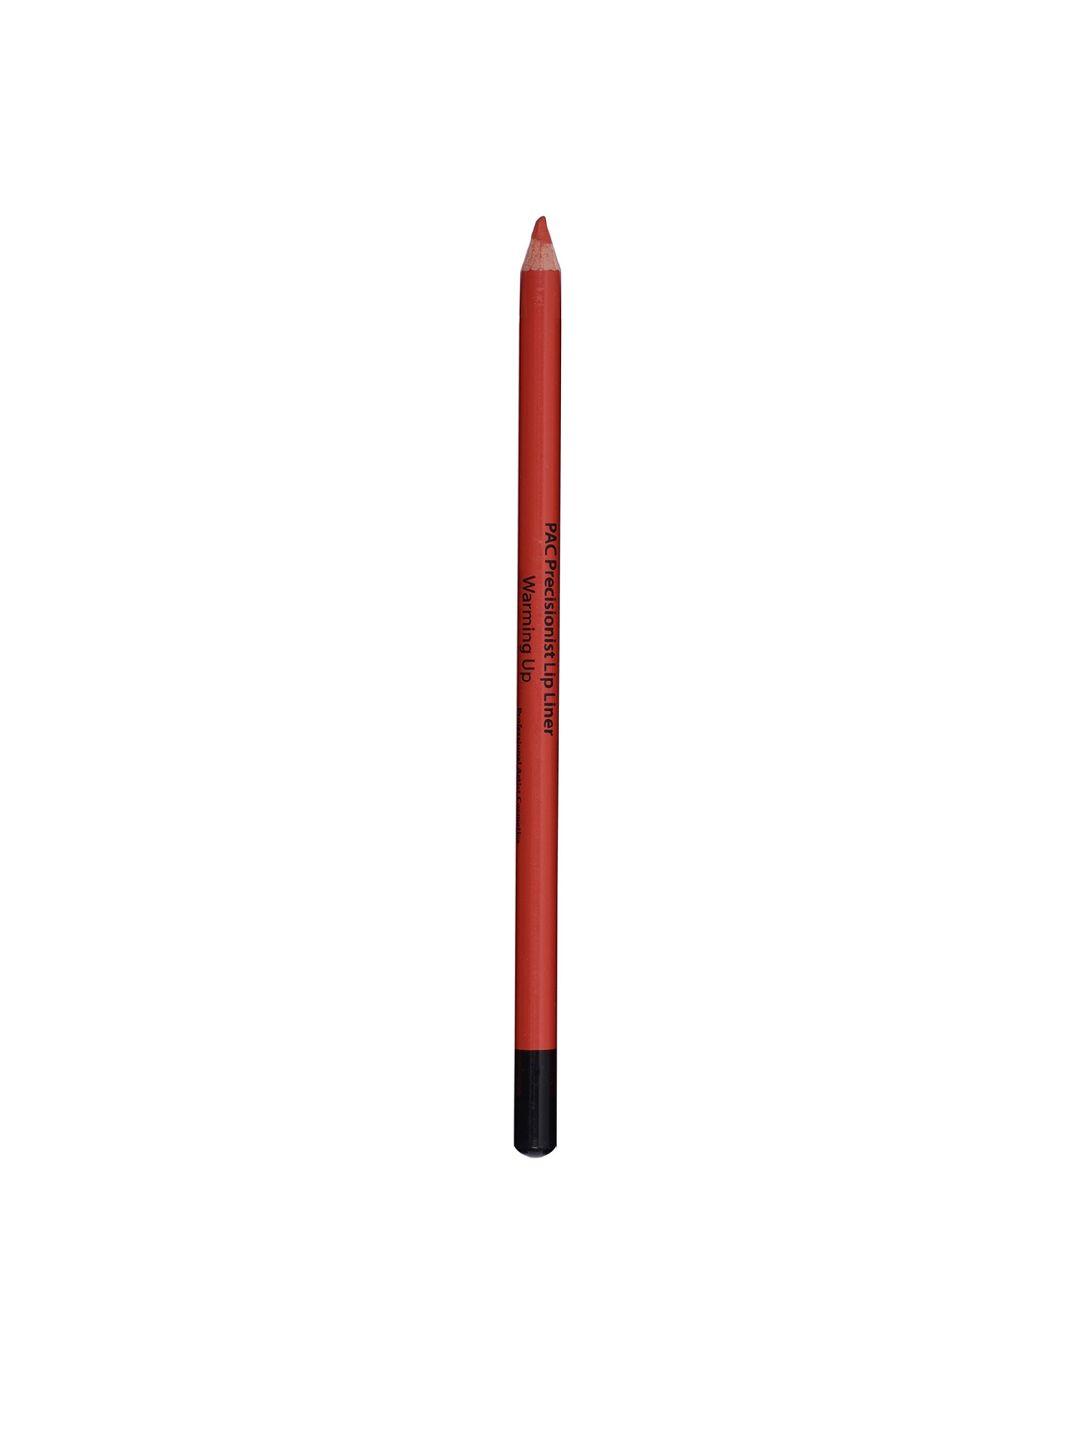 pac precisionist lip liner - warming up